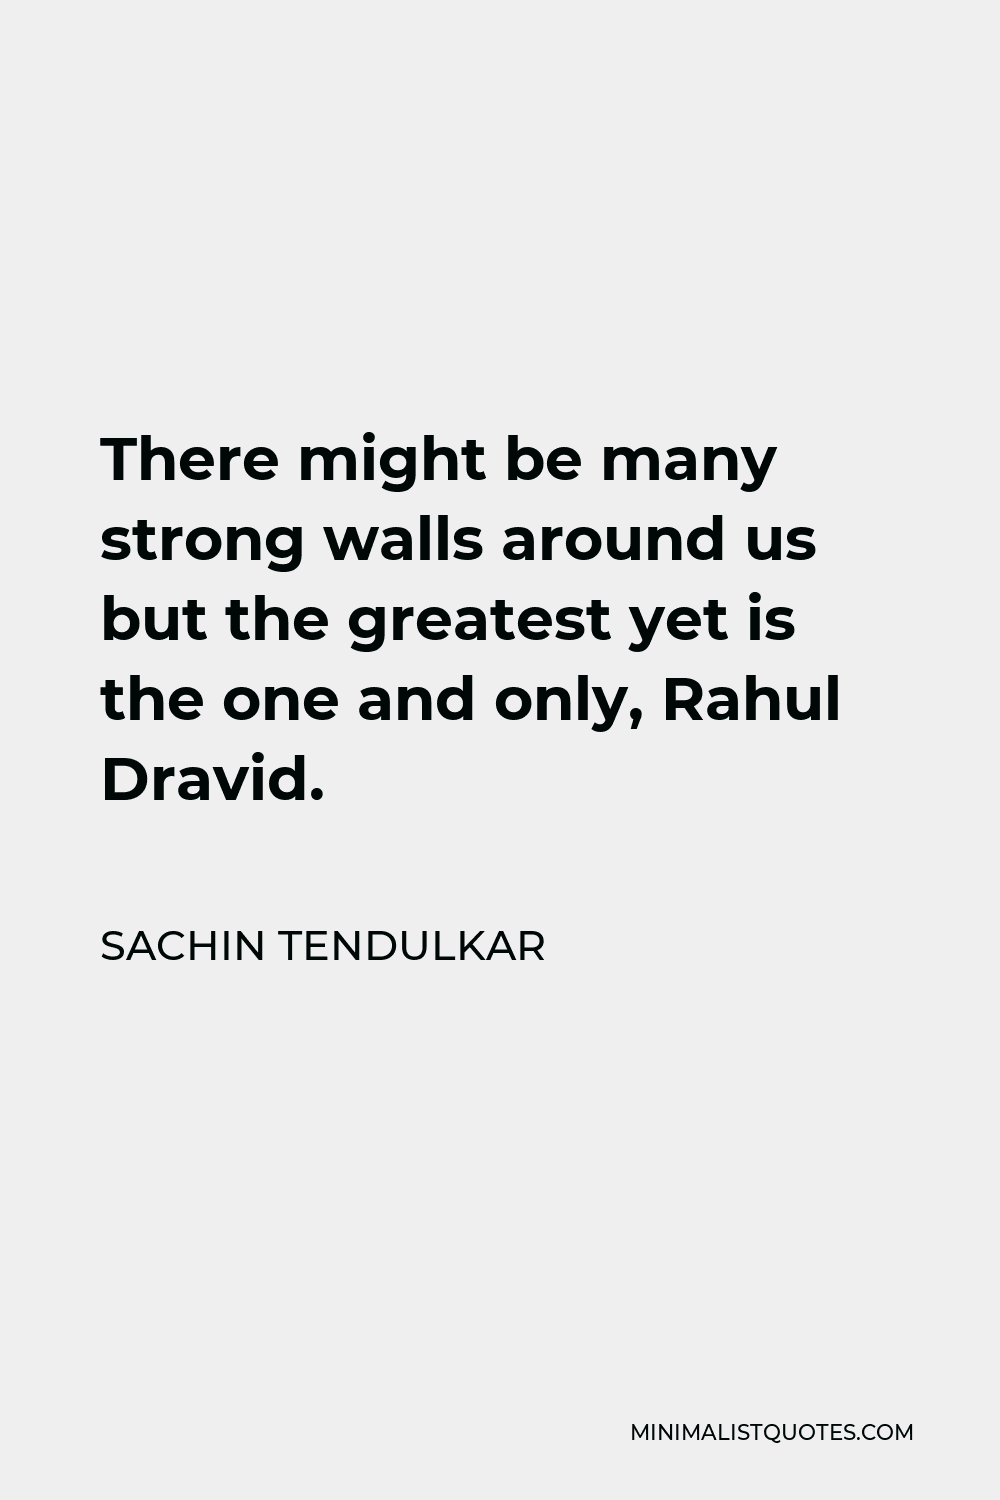 Sachin Tendulkar Quote - There might be many strong walls around us but the greatest yet is the one and only, Rahul Dravid.